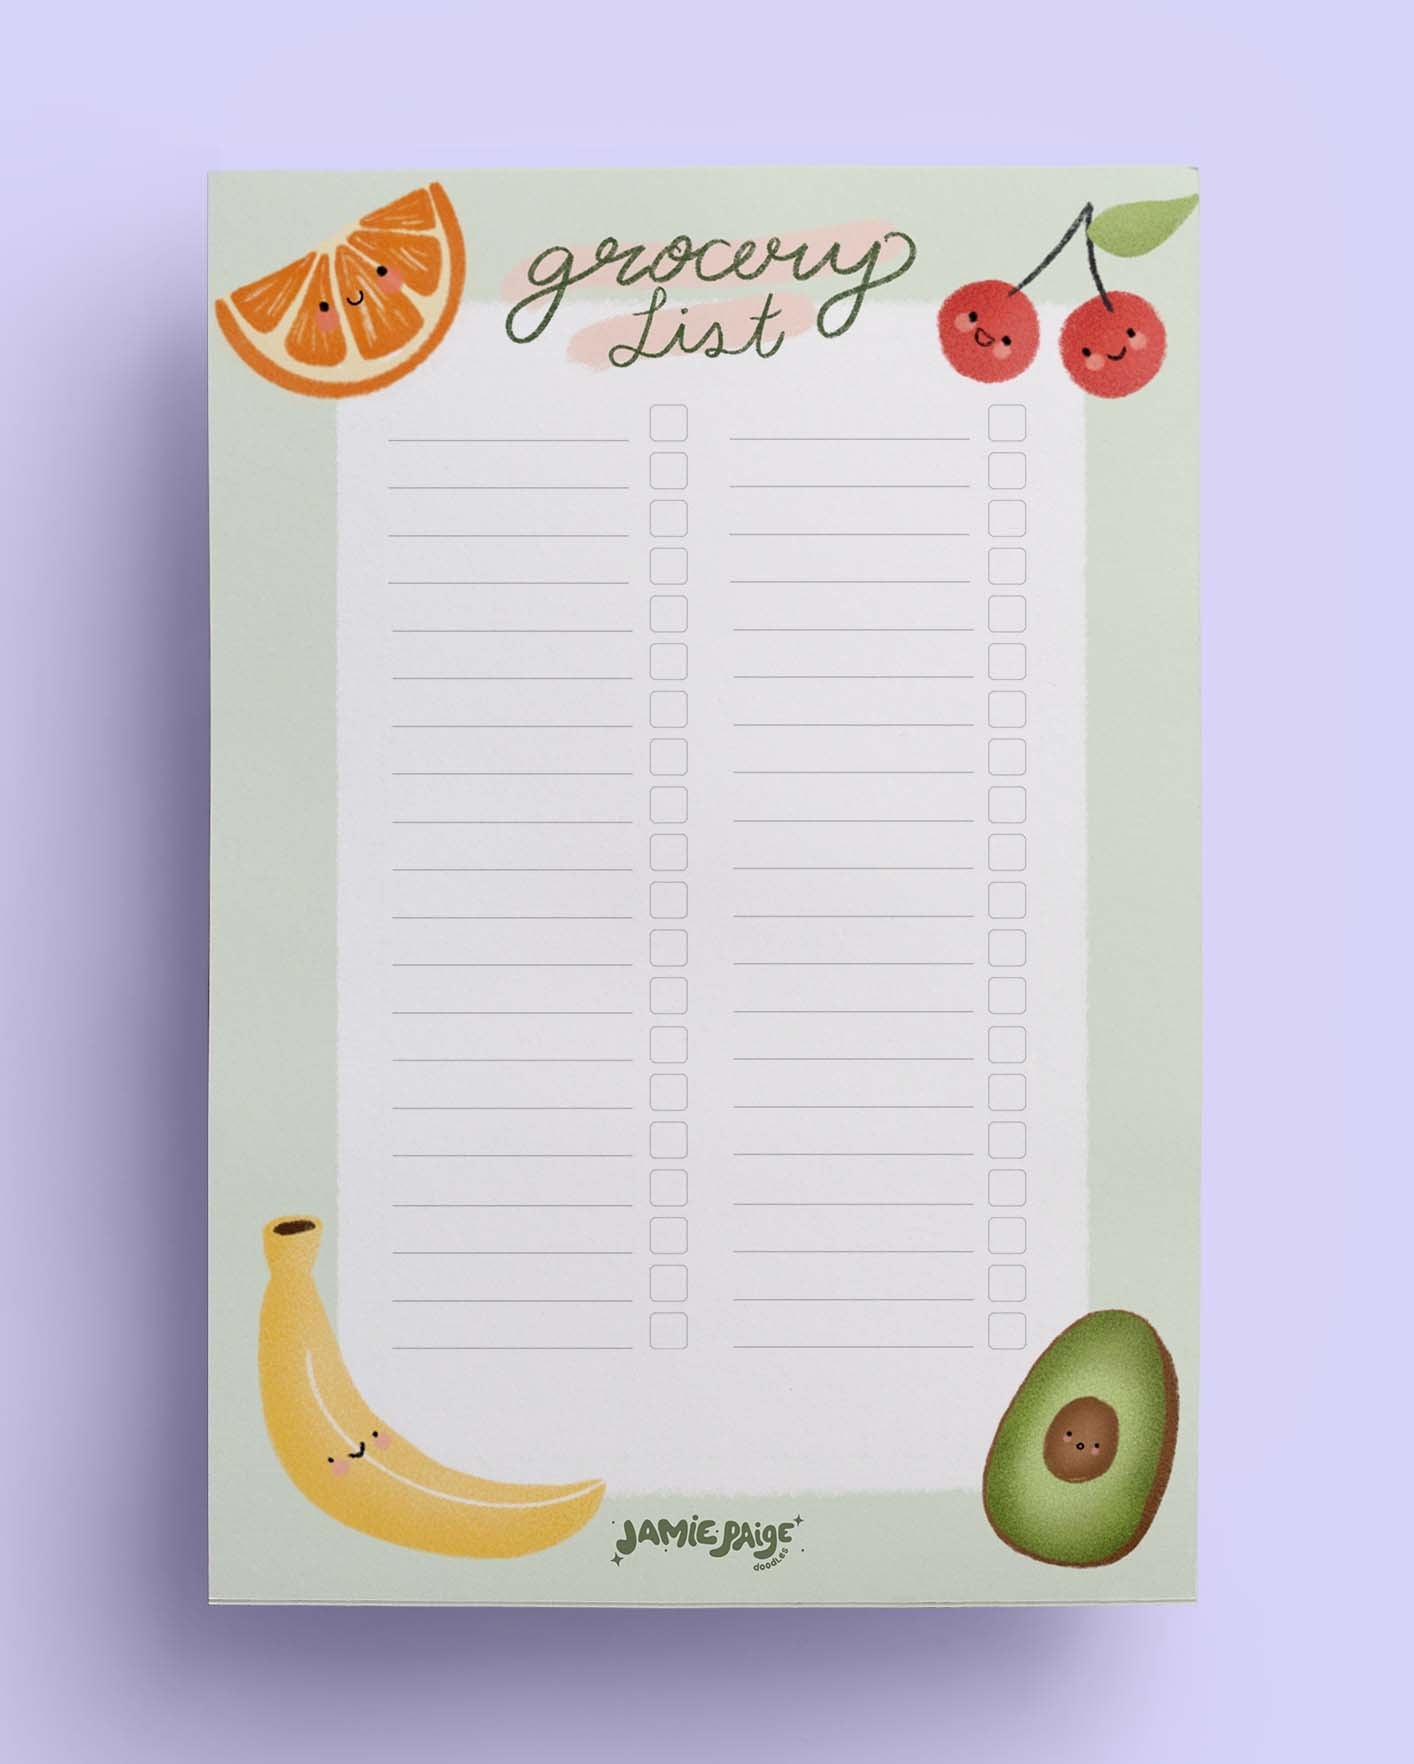 a grocery list notepad with an orange slice, cherries, banana, and half of an avocado illustrated on it